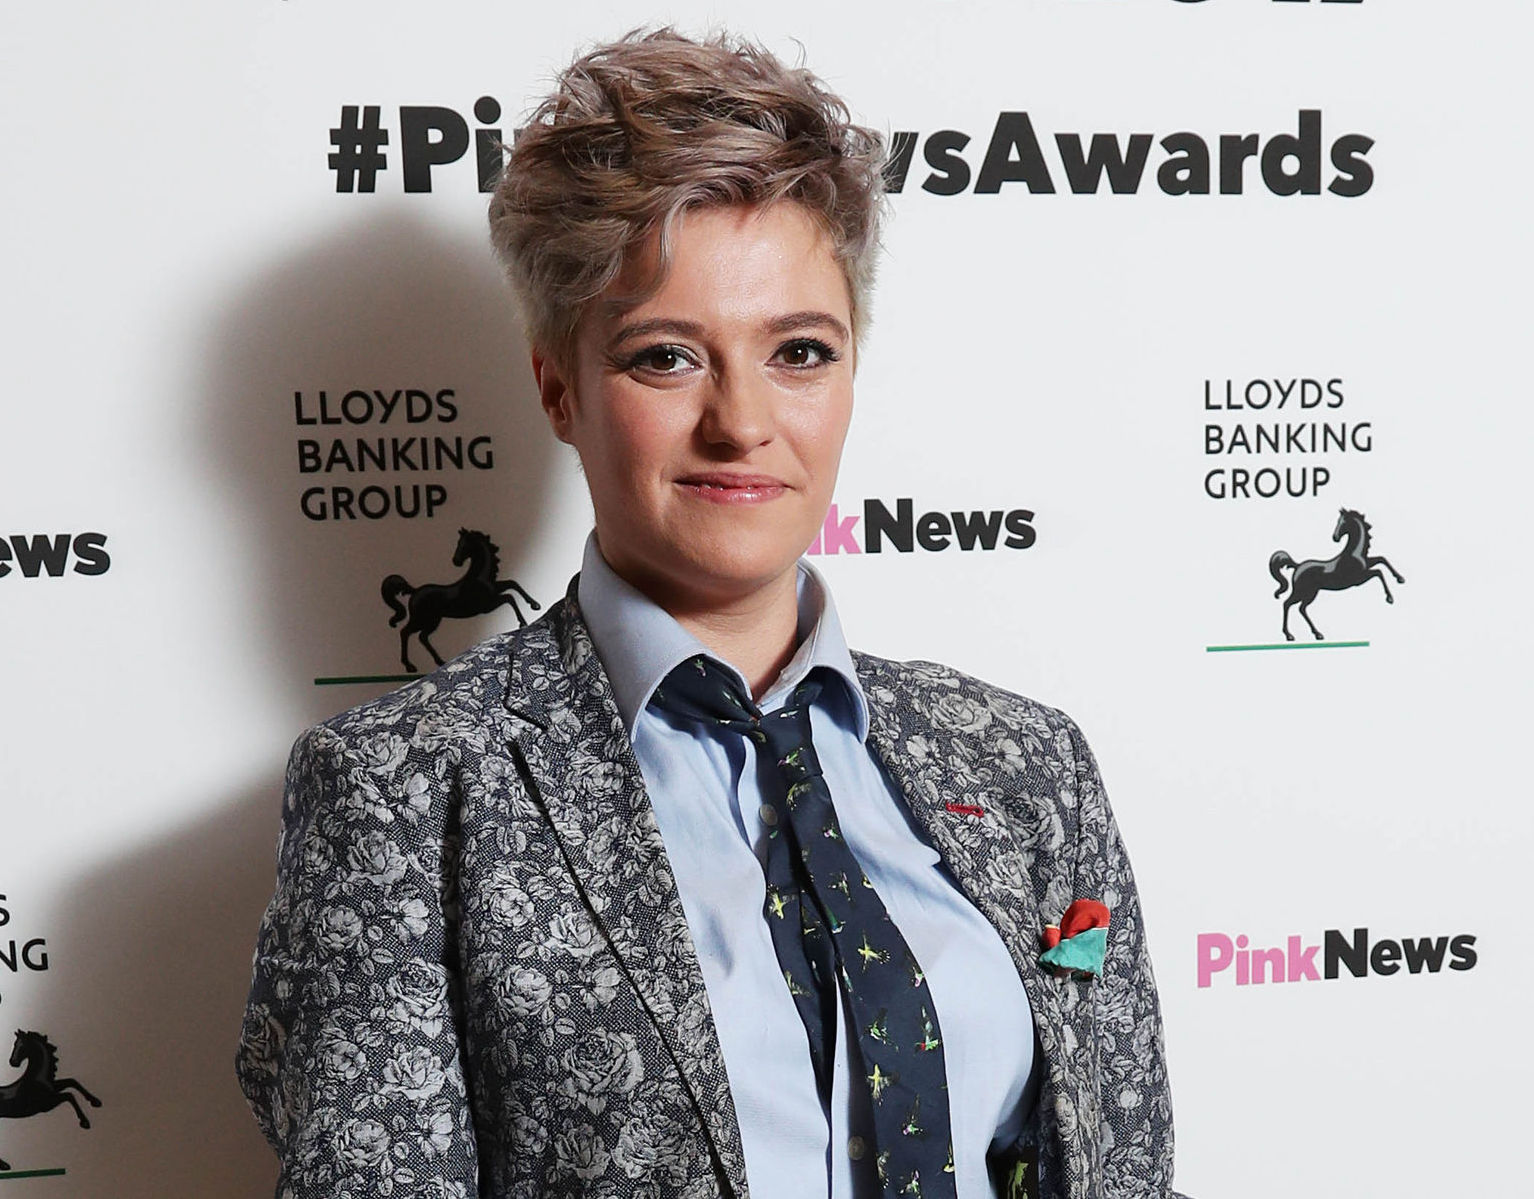 Jack Monroe’s response to an invite onto Piers Morgan’s TV show is epic